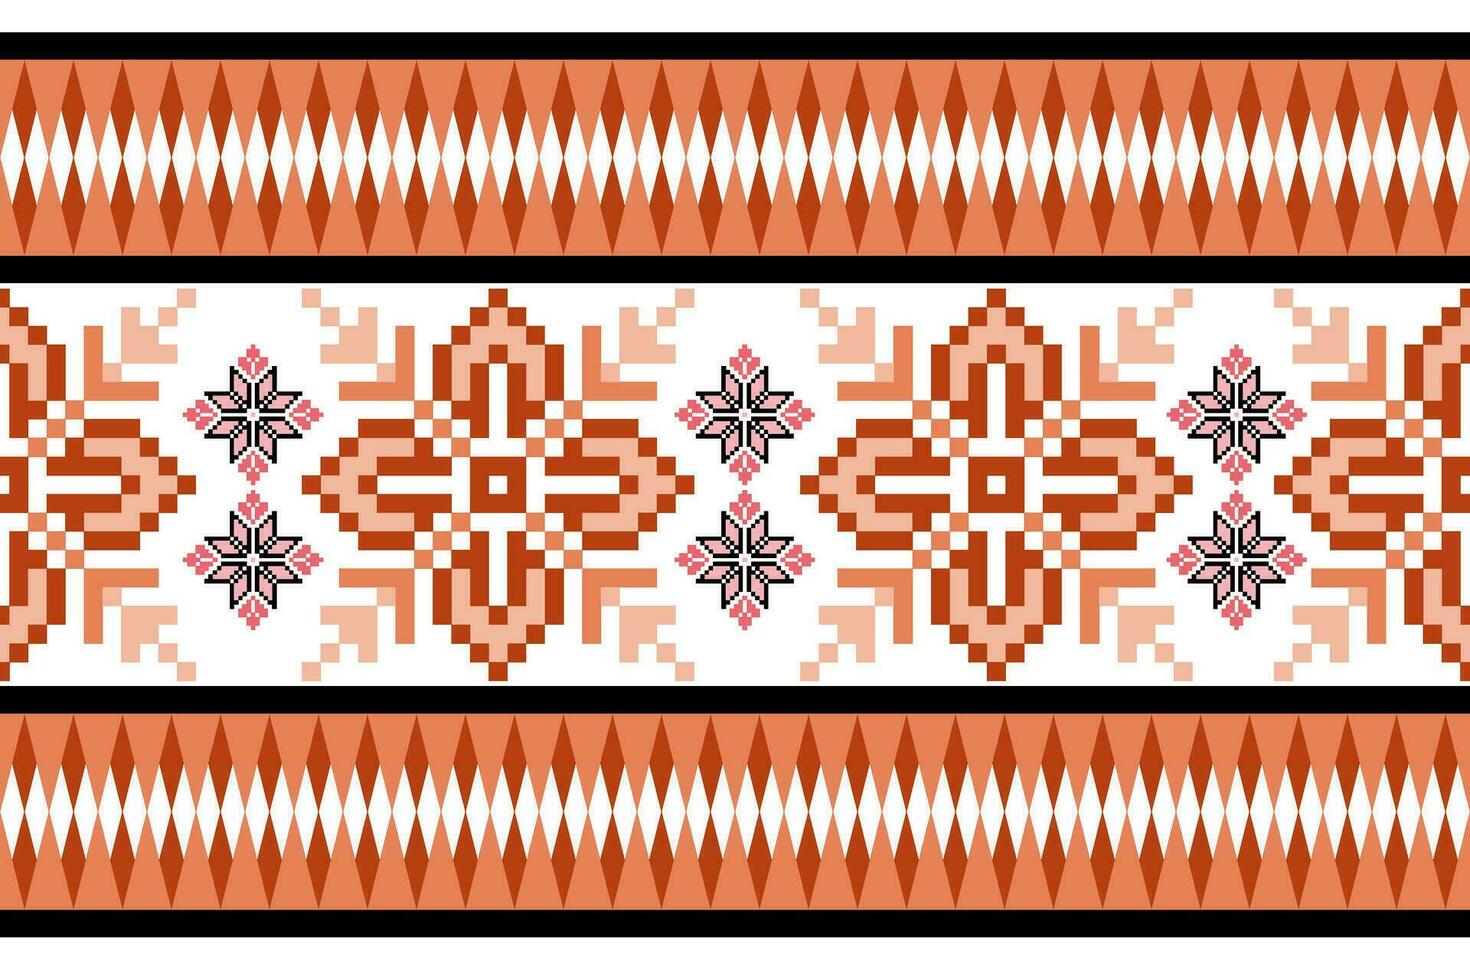 Floral Cross Stitch Embroidery on white background.geometric ethnic oriental seamless pattern traditional.Aztec style abstract vector illustration.design for texture,fabric,clothing,wrapping,sarong.